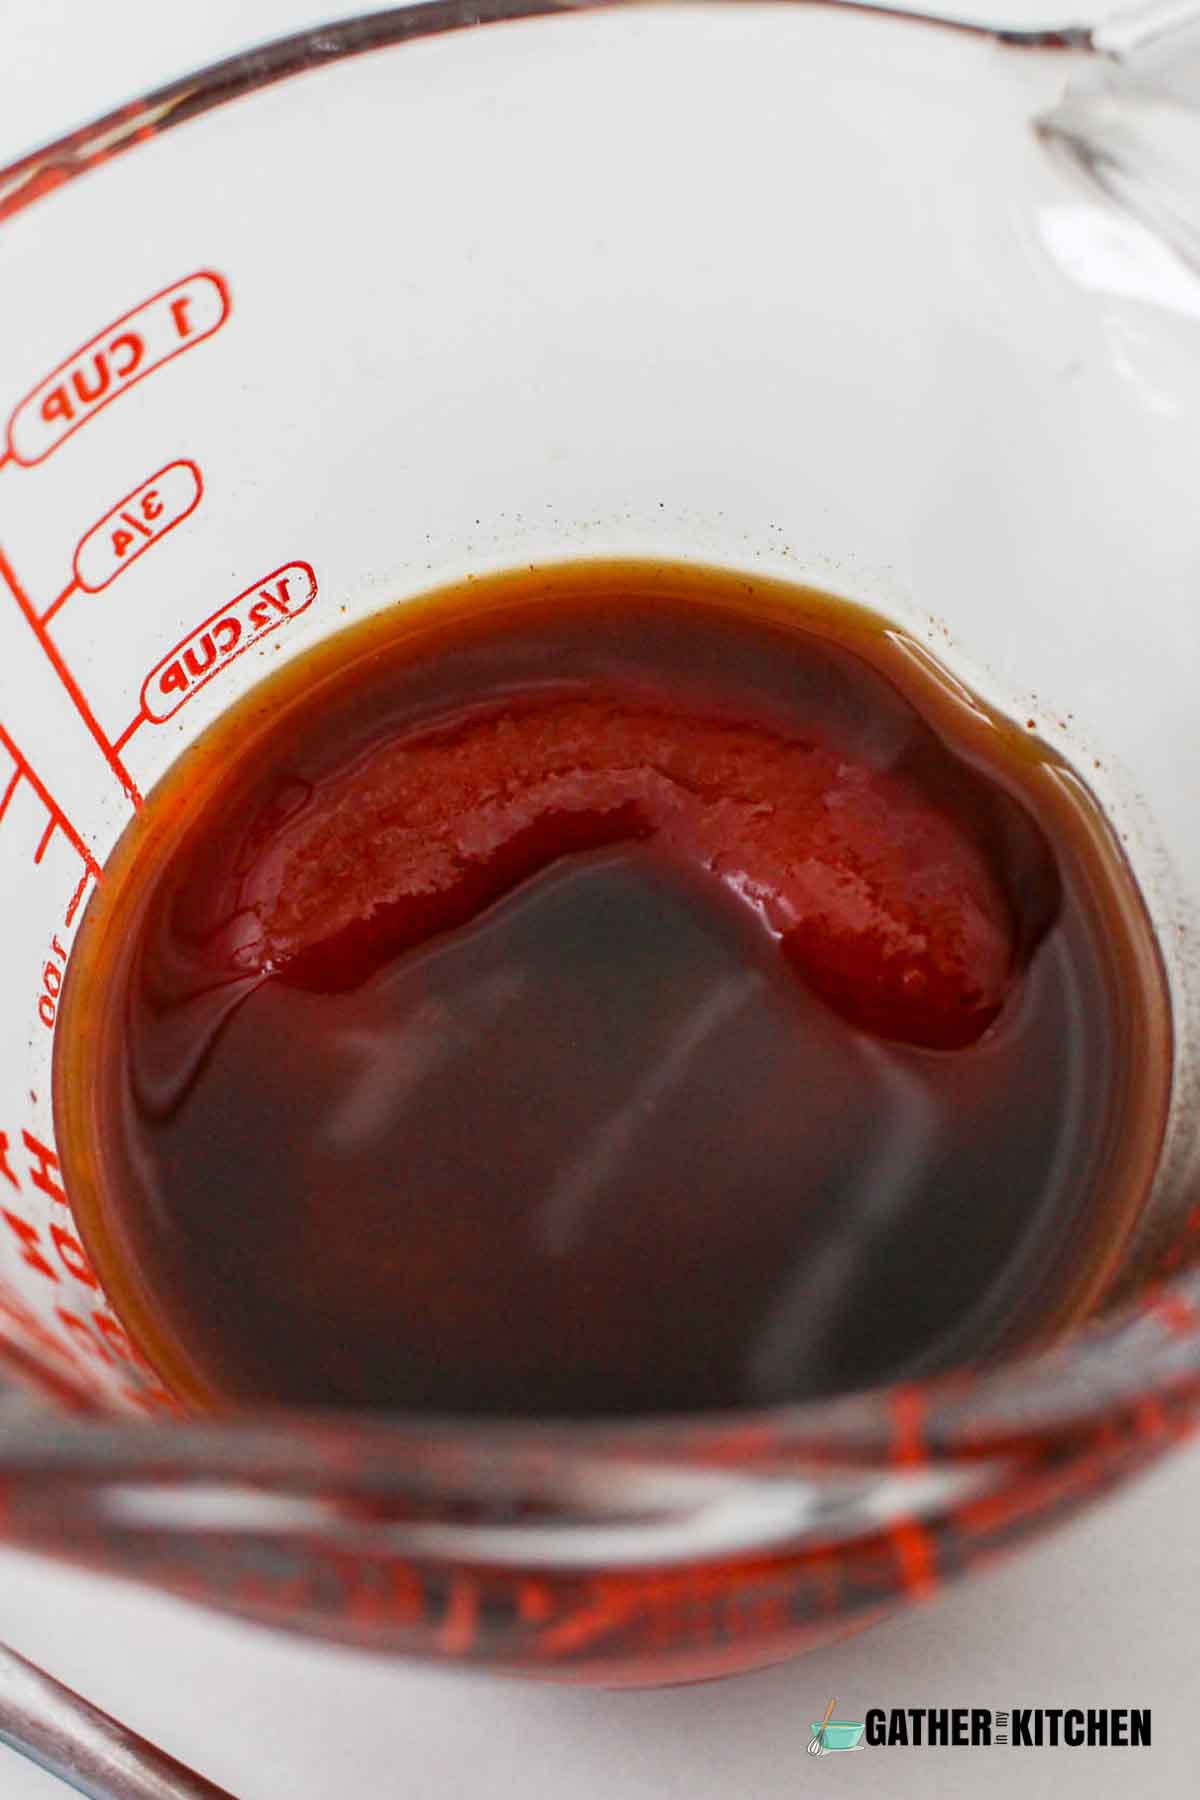 Ketchup, hot sauce, and Worcestershire sauce in a measuring cup.